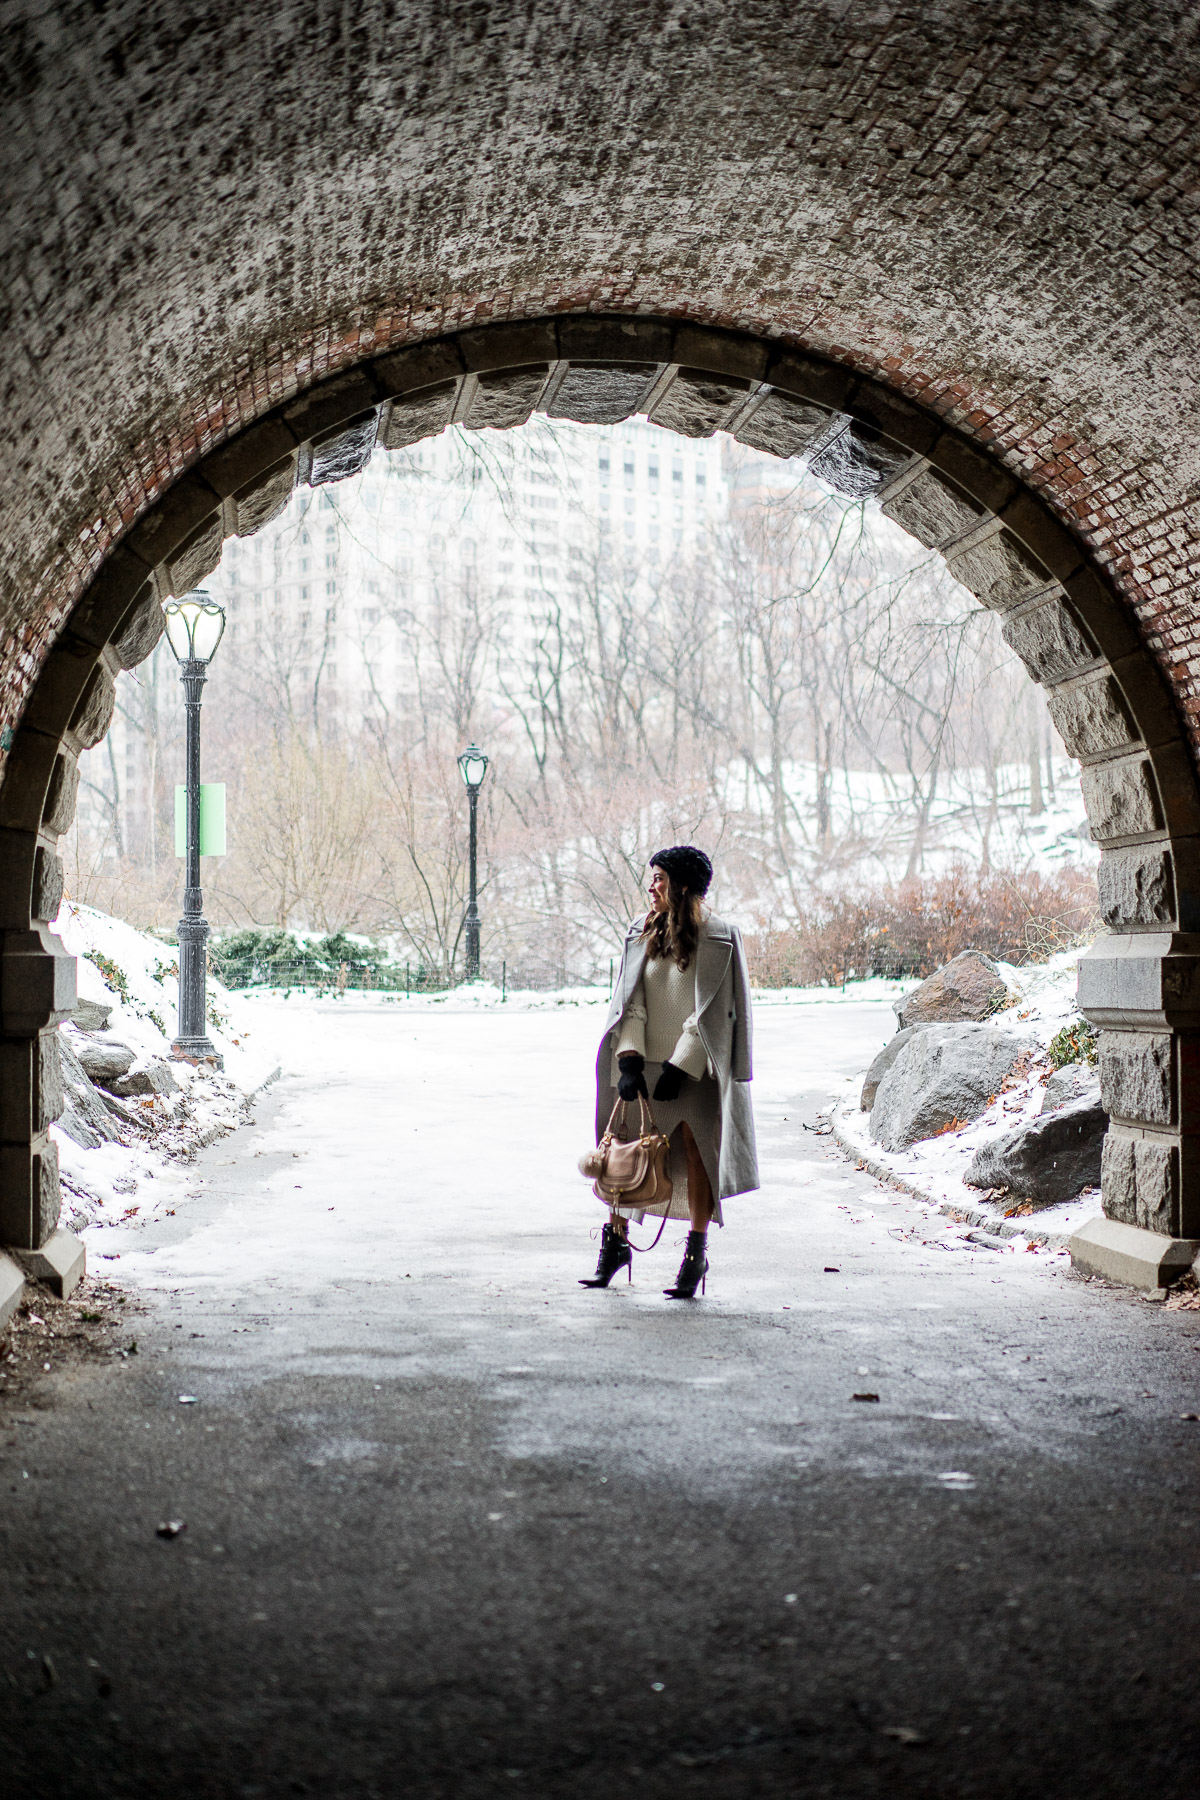 Fashion blogger Amanda visits Central Park tunnel during NYFW wearing BCBGeneration grey midi sweater skirt and carrying Chloe Marcie bag while it snows